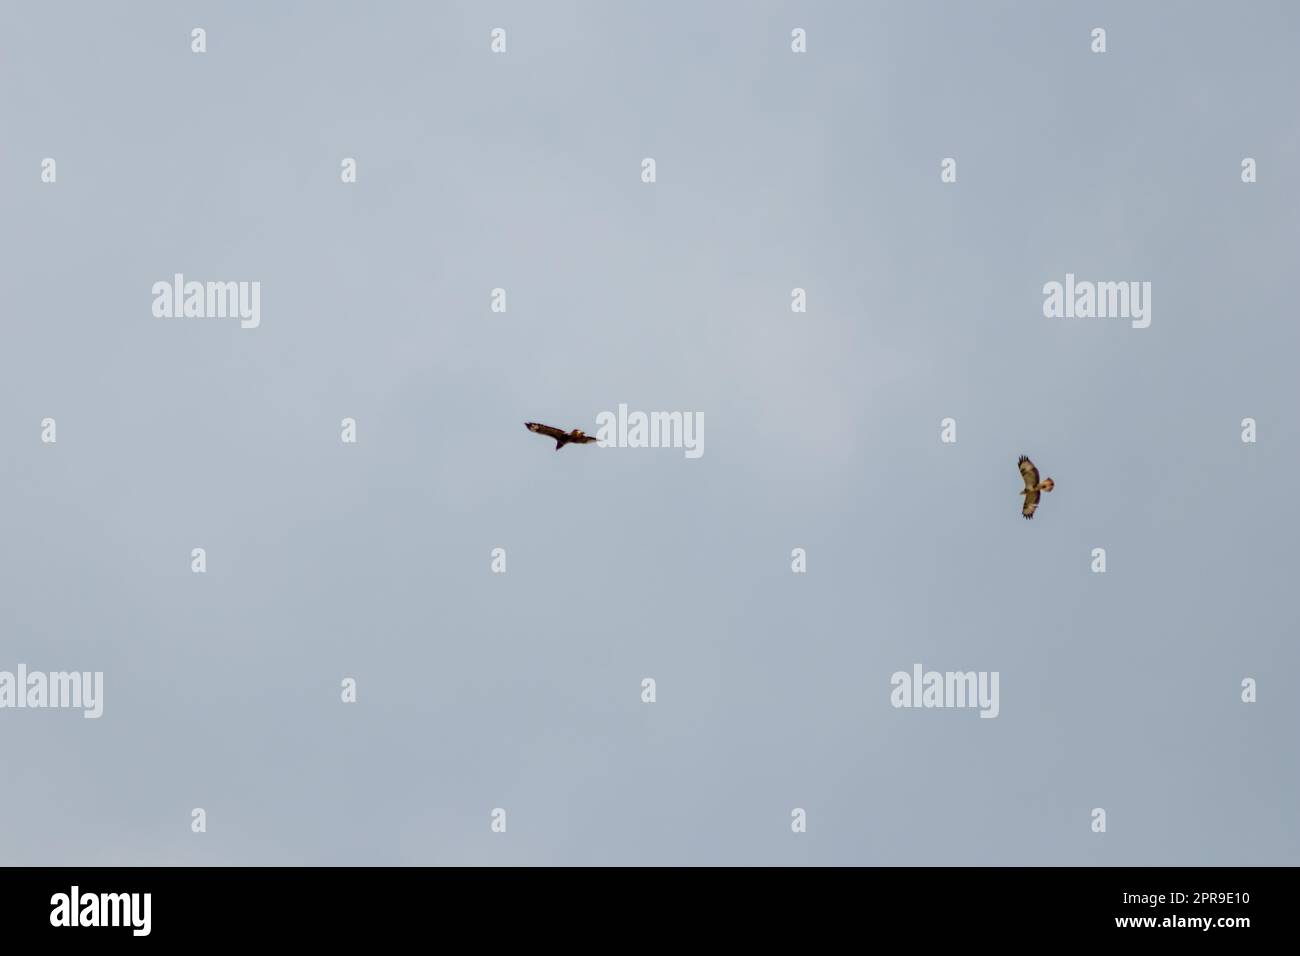 Flying couple of mating falcons with spreaded wings and brown feathers or golden eagles (aquila chrysaetos) hunting for other birds, mice and rats as bird of prey in sky background in mating season Stock Photo